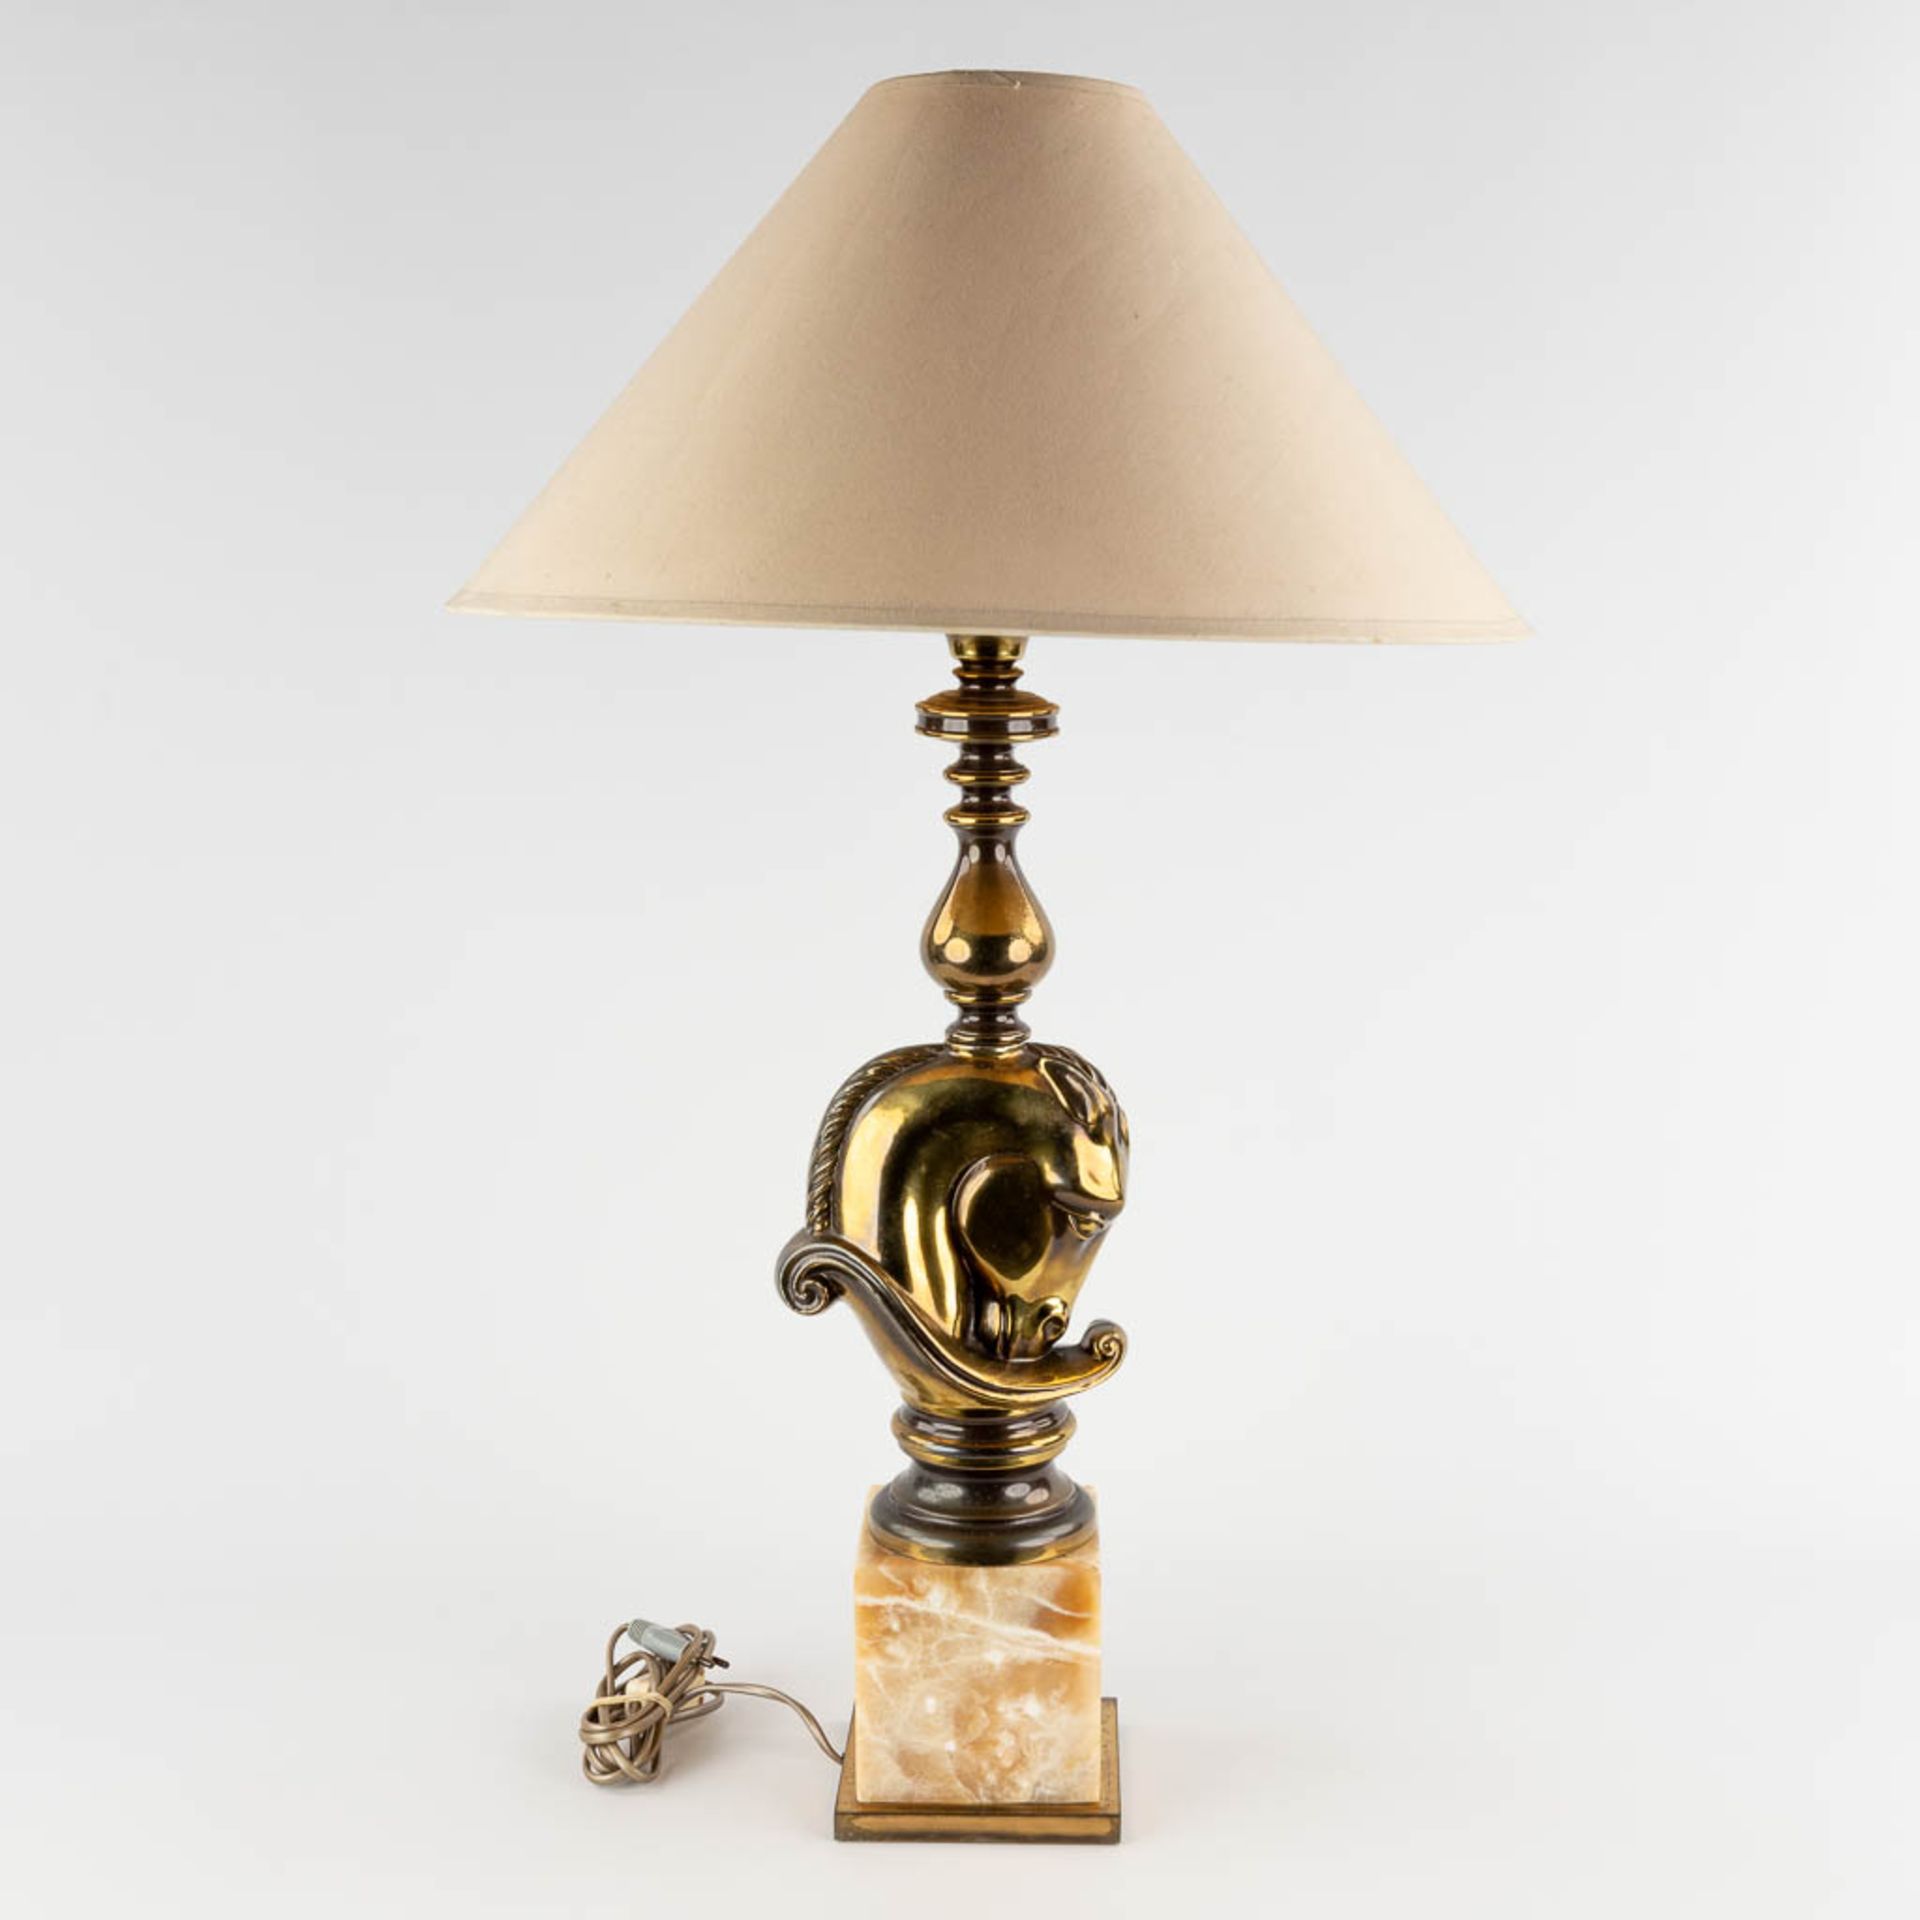 Deknudt, A table lamp with horse head, bronze on onyx. (D:14 x W:18 x H:60 cm) - Image 3 of 10